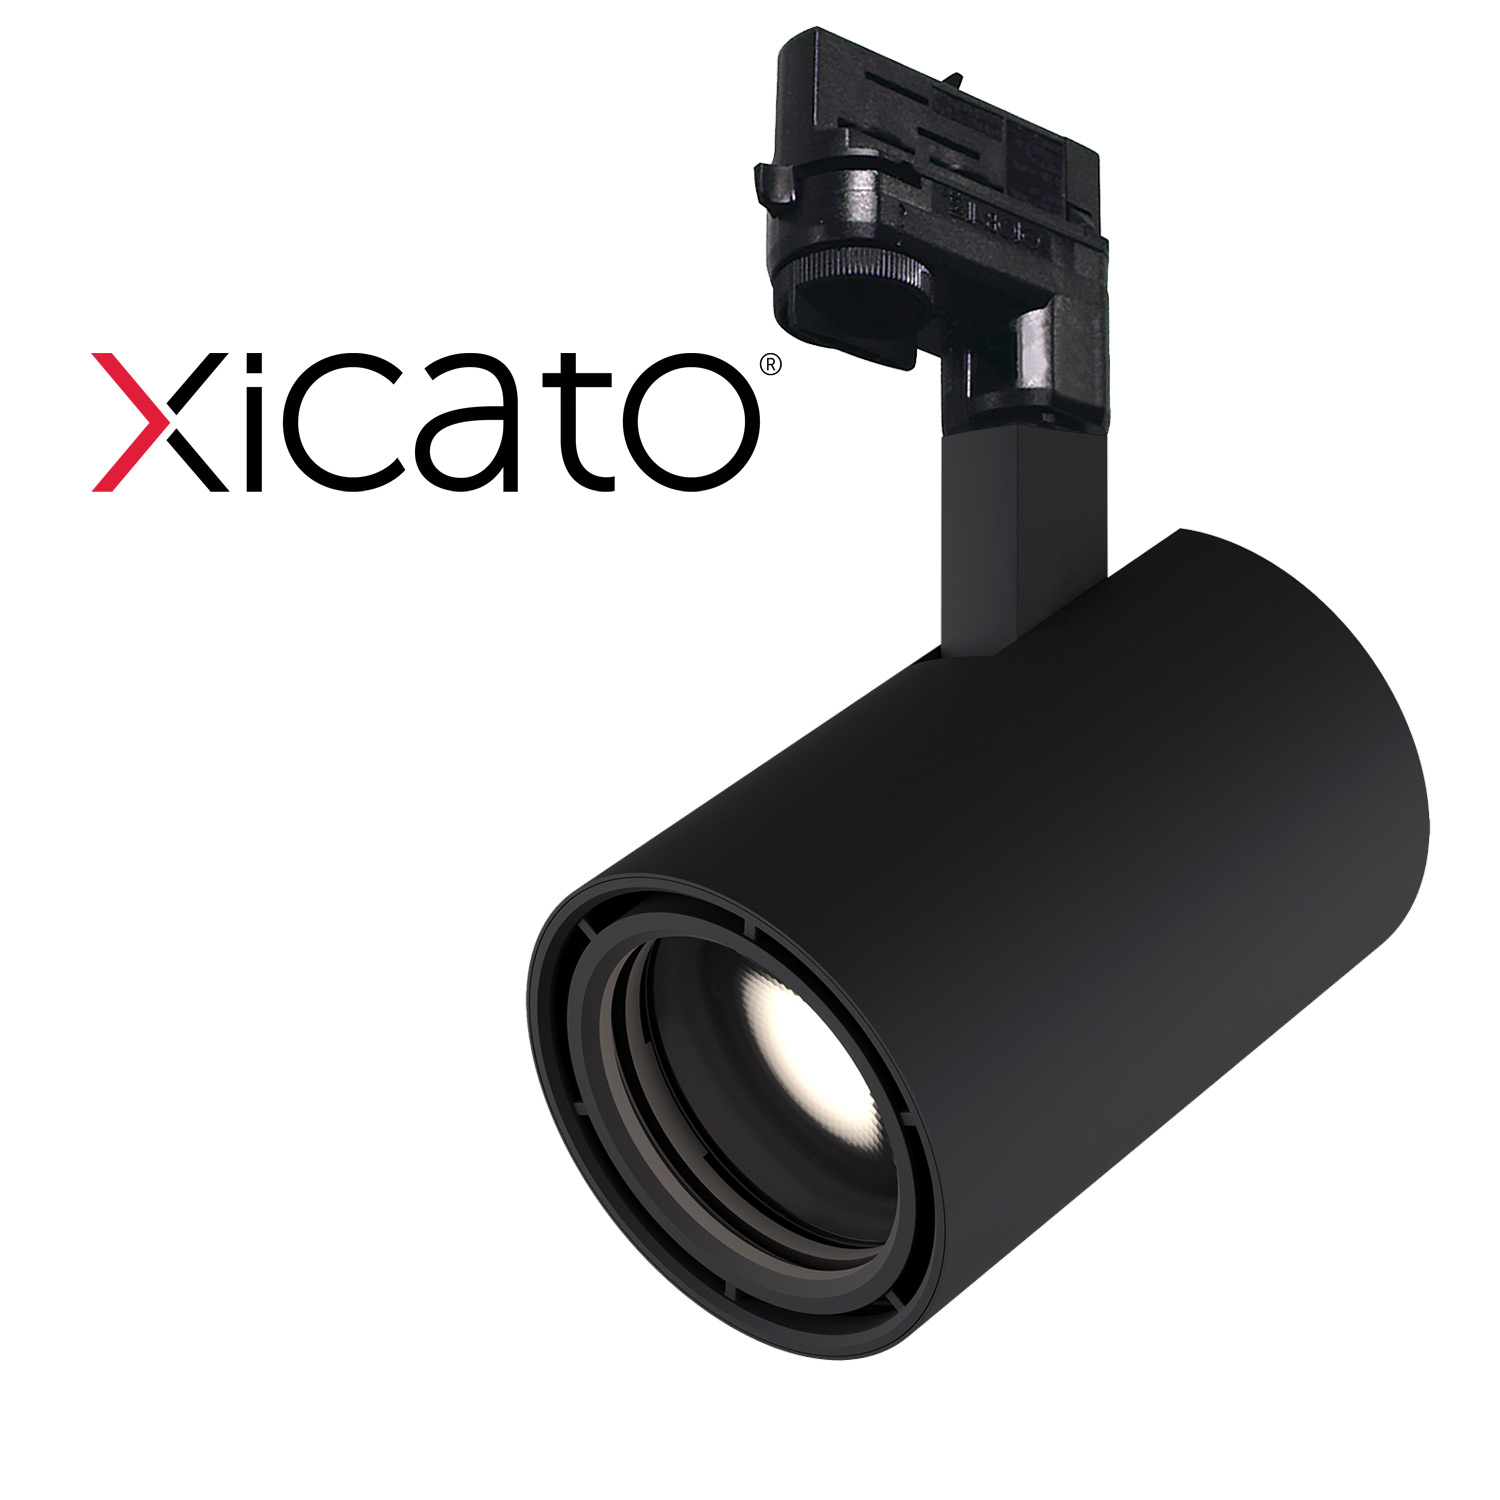 Product image for Gallery XL Track Luminaire with Xicato LED for Nordic Track Systems